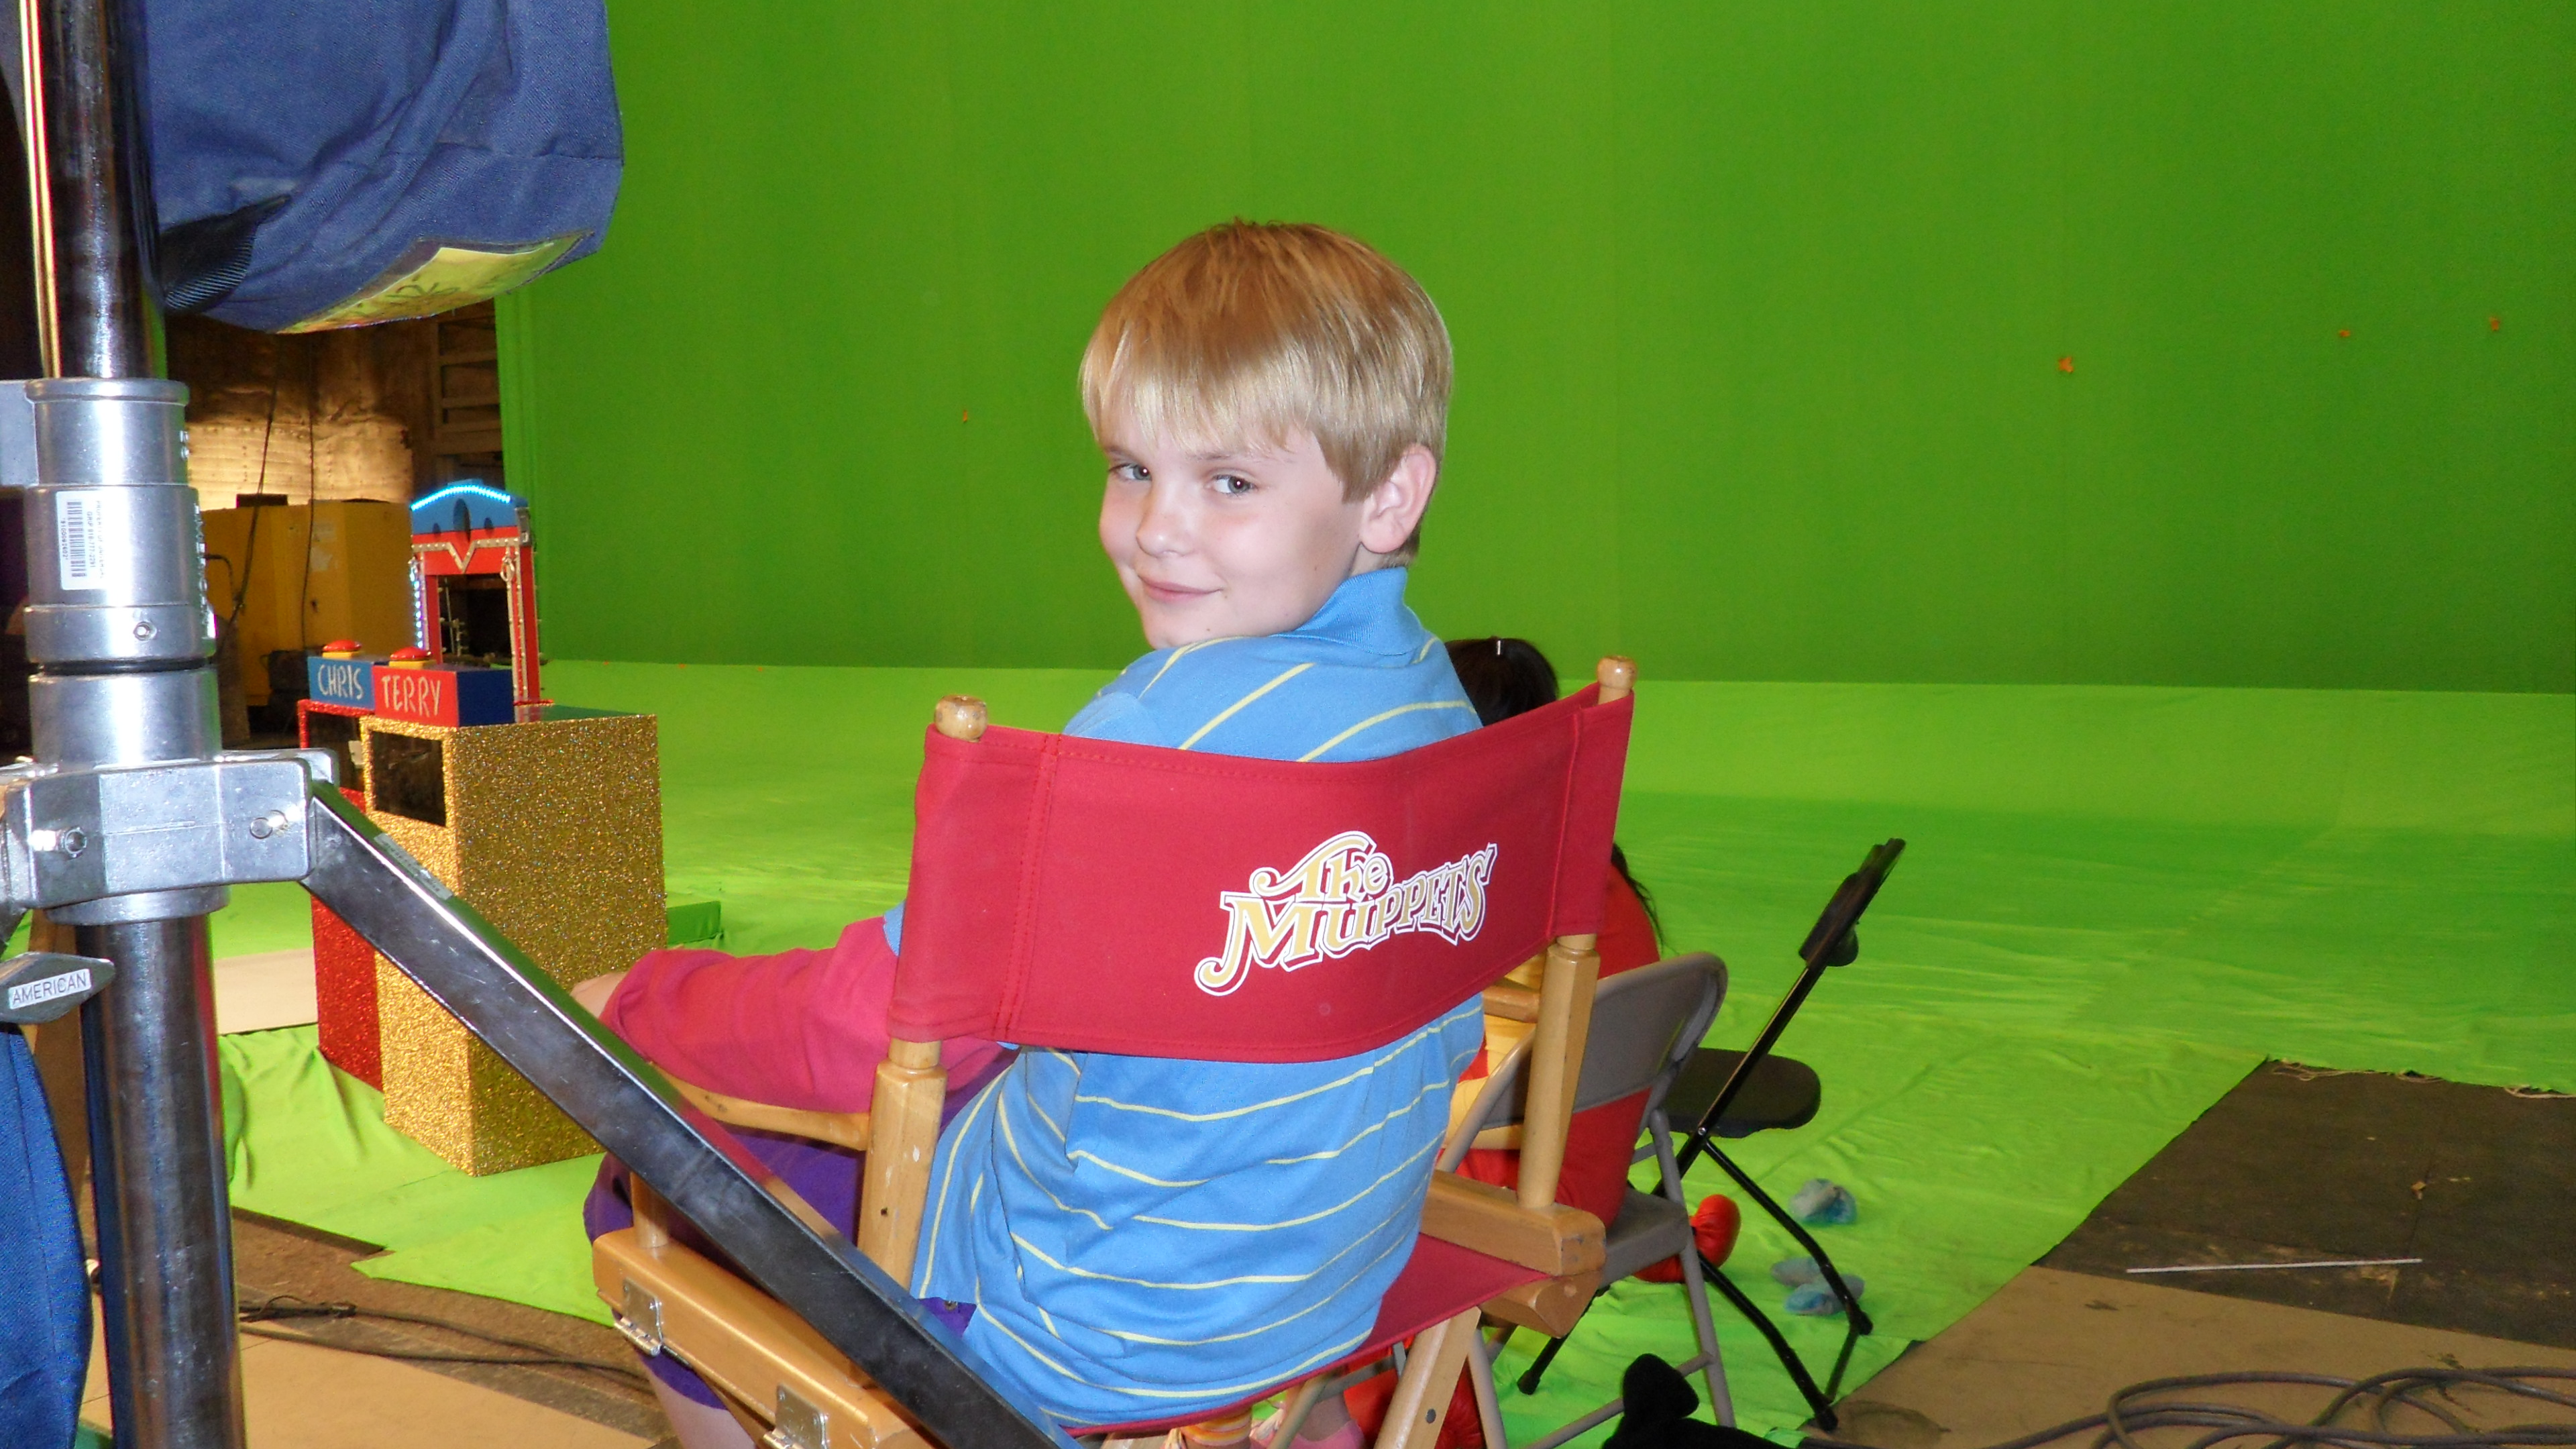 Reese Hartwig on the set of THE MUPPETS - Jan 2011